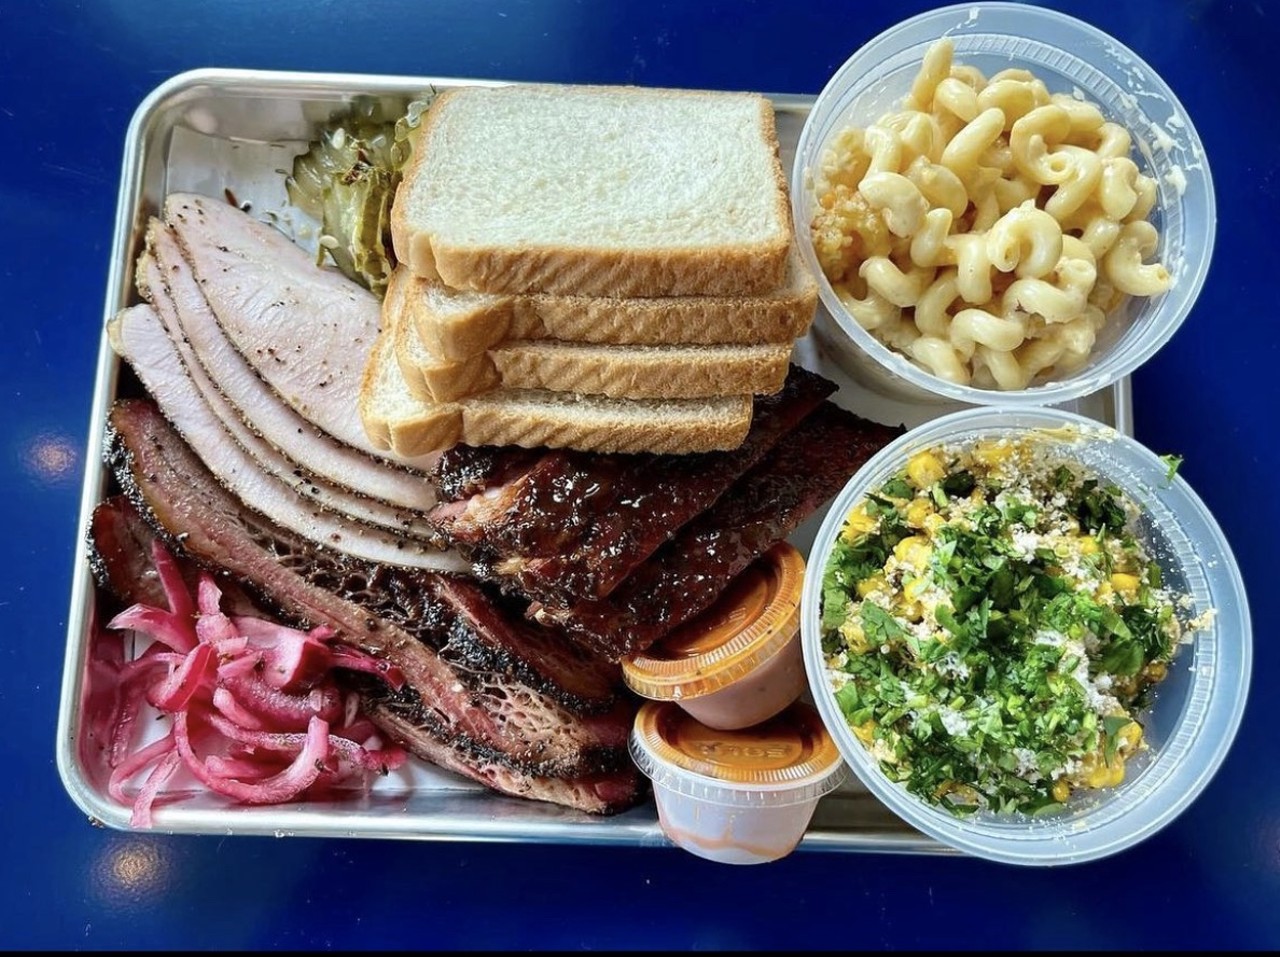 Blu Lacy
1303 Lorenzo St., Castroville, (830) 359-8720, instagram.com/blulacysmokehouse
Brought to us by Esaul Ramos — the brains behind 2M Smokehouse — Blu Lacy made its debut in Castroville this fall. The spot smokes its meats on site in a new pit building that houses a mammoth wood-fired smoker from Texas-based M&M BBQ Company. Blu Lacy also features desserts and bread made by Ramos’ wife Grecia, who recently opened her own venture, Baked, next door.